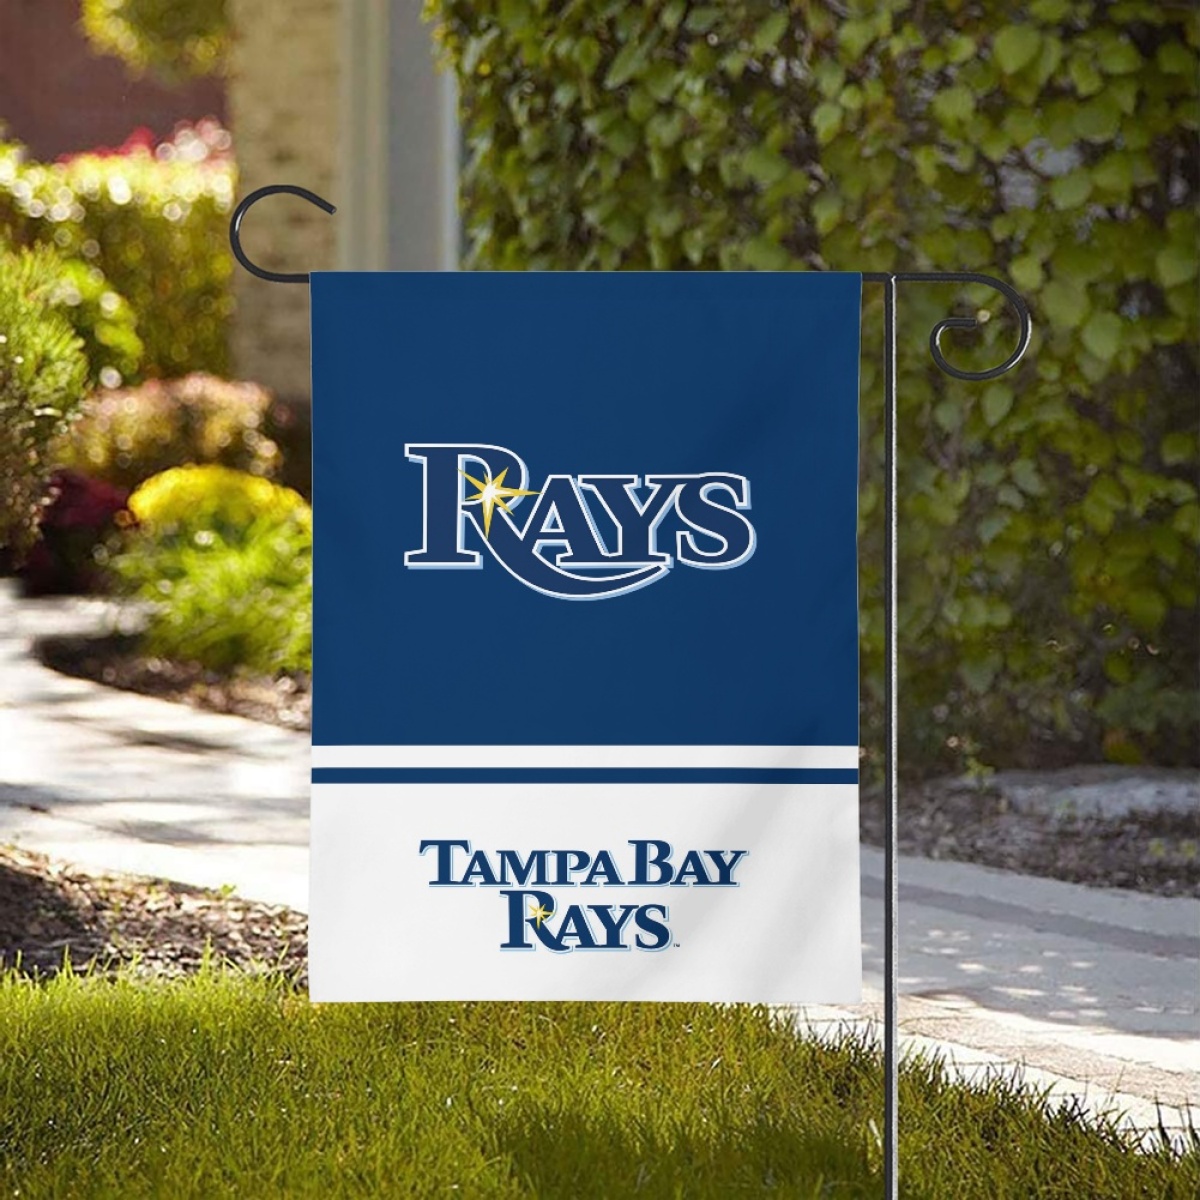 Tampa Bay Rays Double-Sided Garden Flag 001 (Pls check description for details)